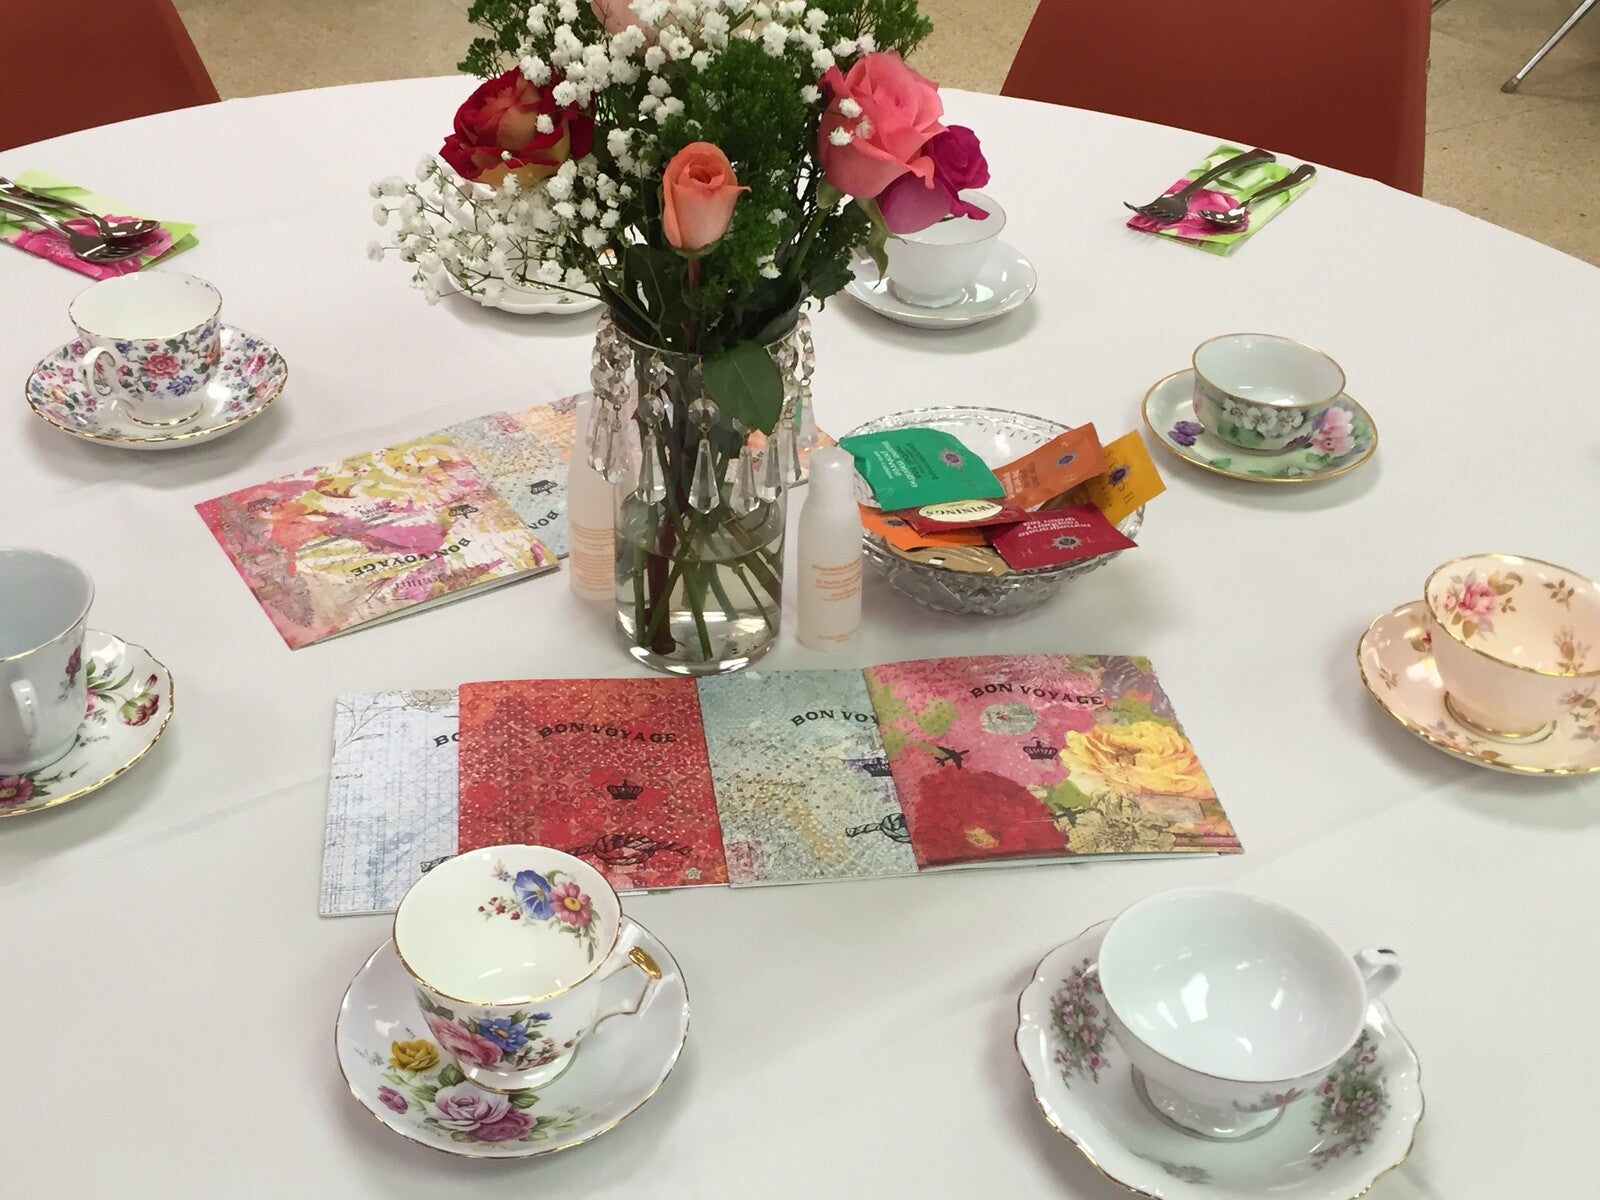 Queen's Tea table set with china tea cups, flowers and floral napkins